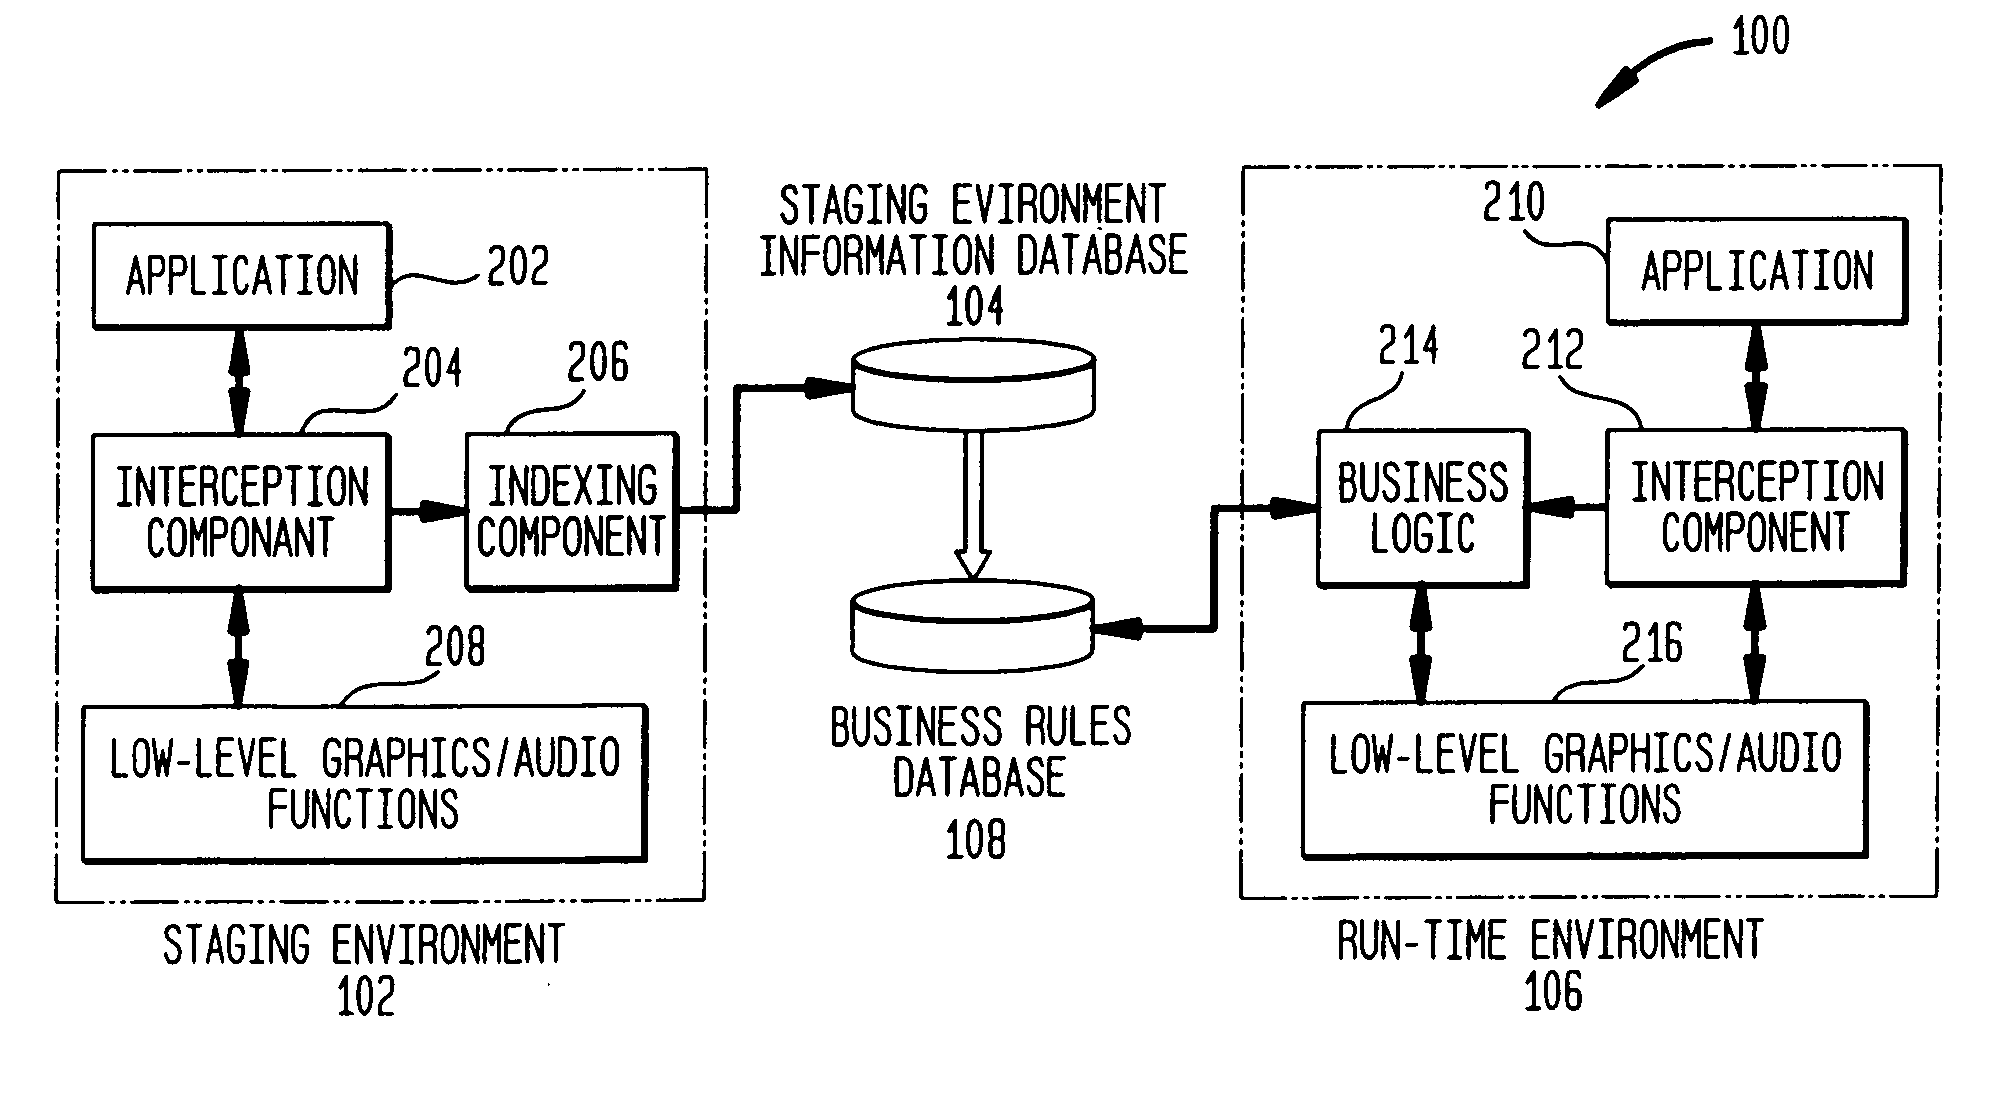 System, method and computer program product for dynamically measuring properties of objects rendered and/or referenced by an application executing on a computing device